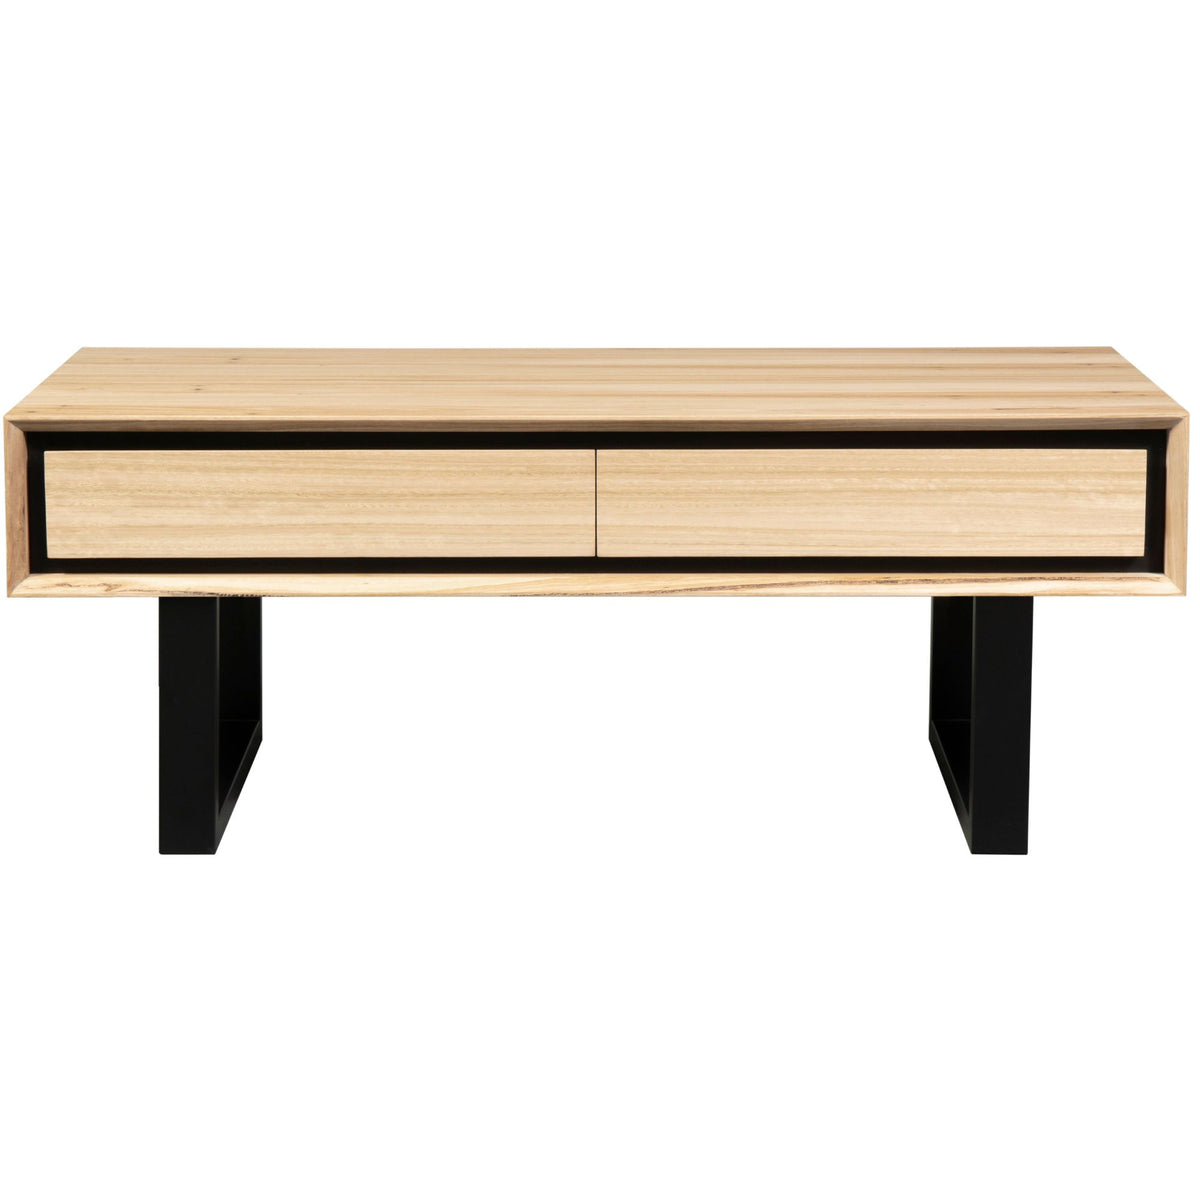 Aconite Coffee Table 120cm 2 Drawers Solid Messmate Timber Wood - Natural